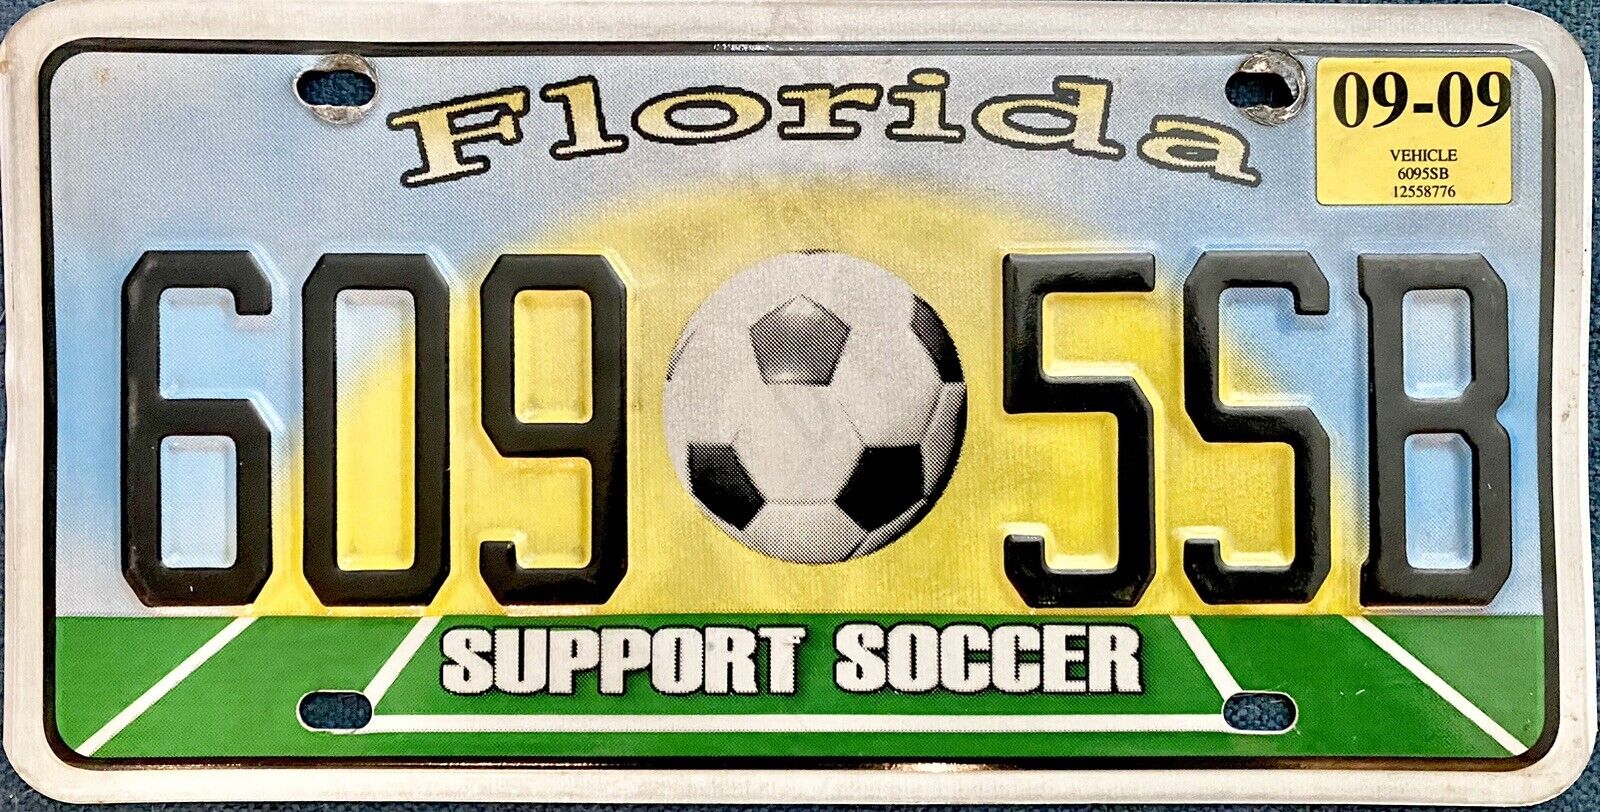 2009 Florida Support Soccer License Plate EXPIRED